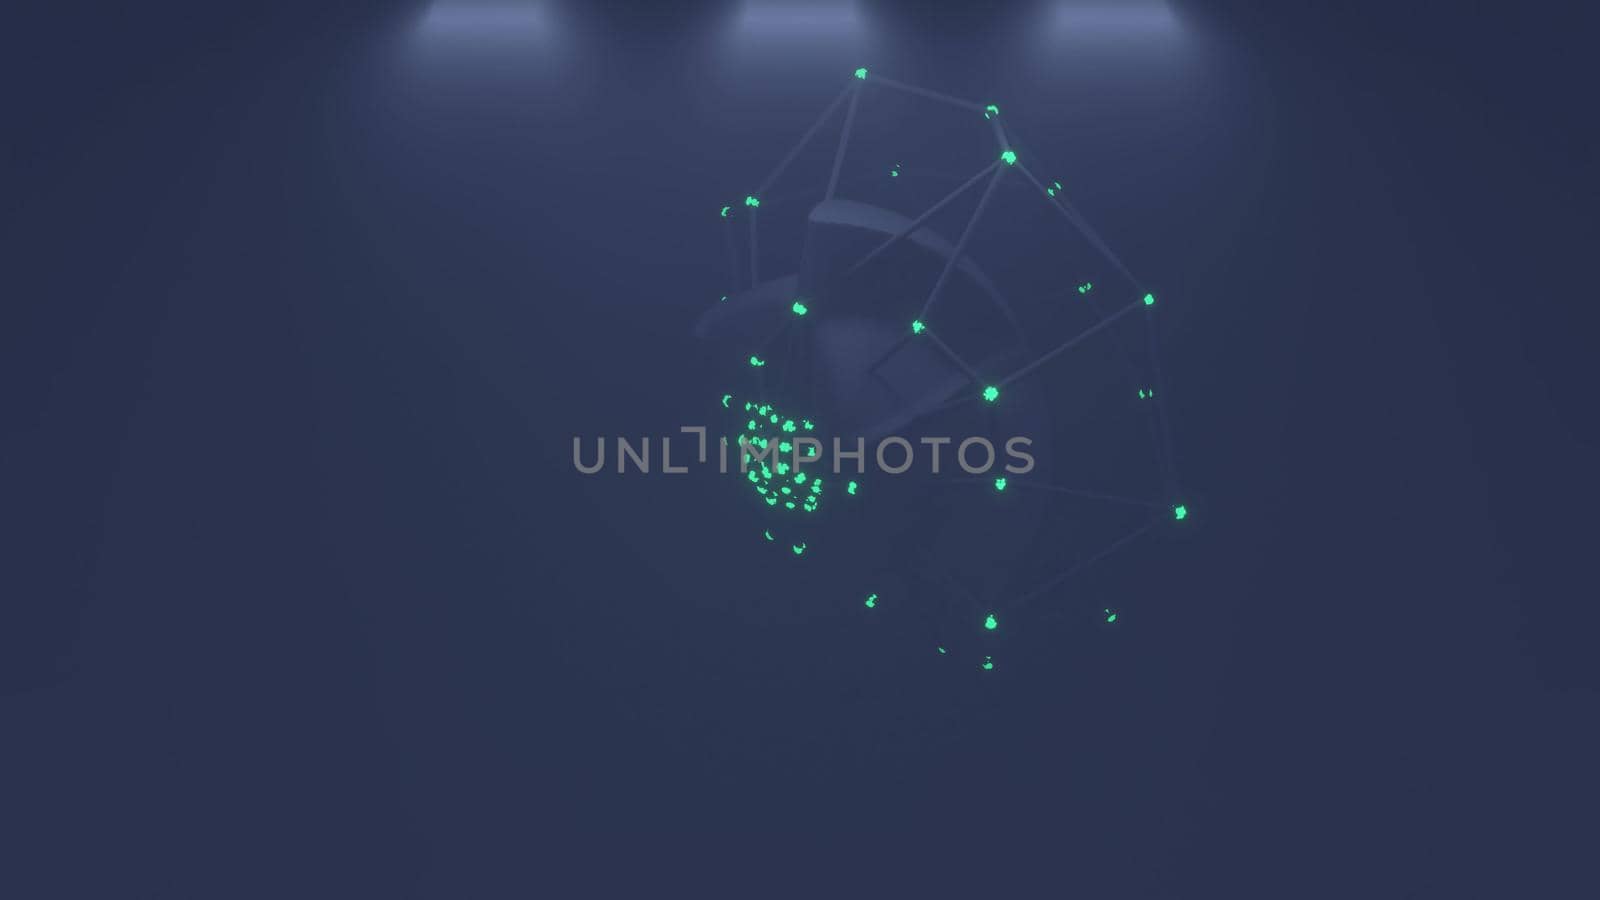 Dark 3d illustration of flying space object with glowing green lights in 4K UHD cyberspace